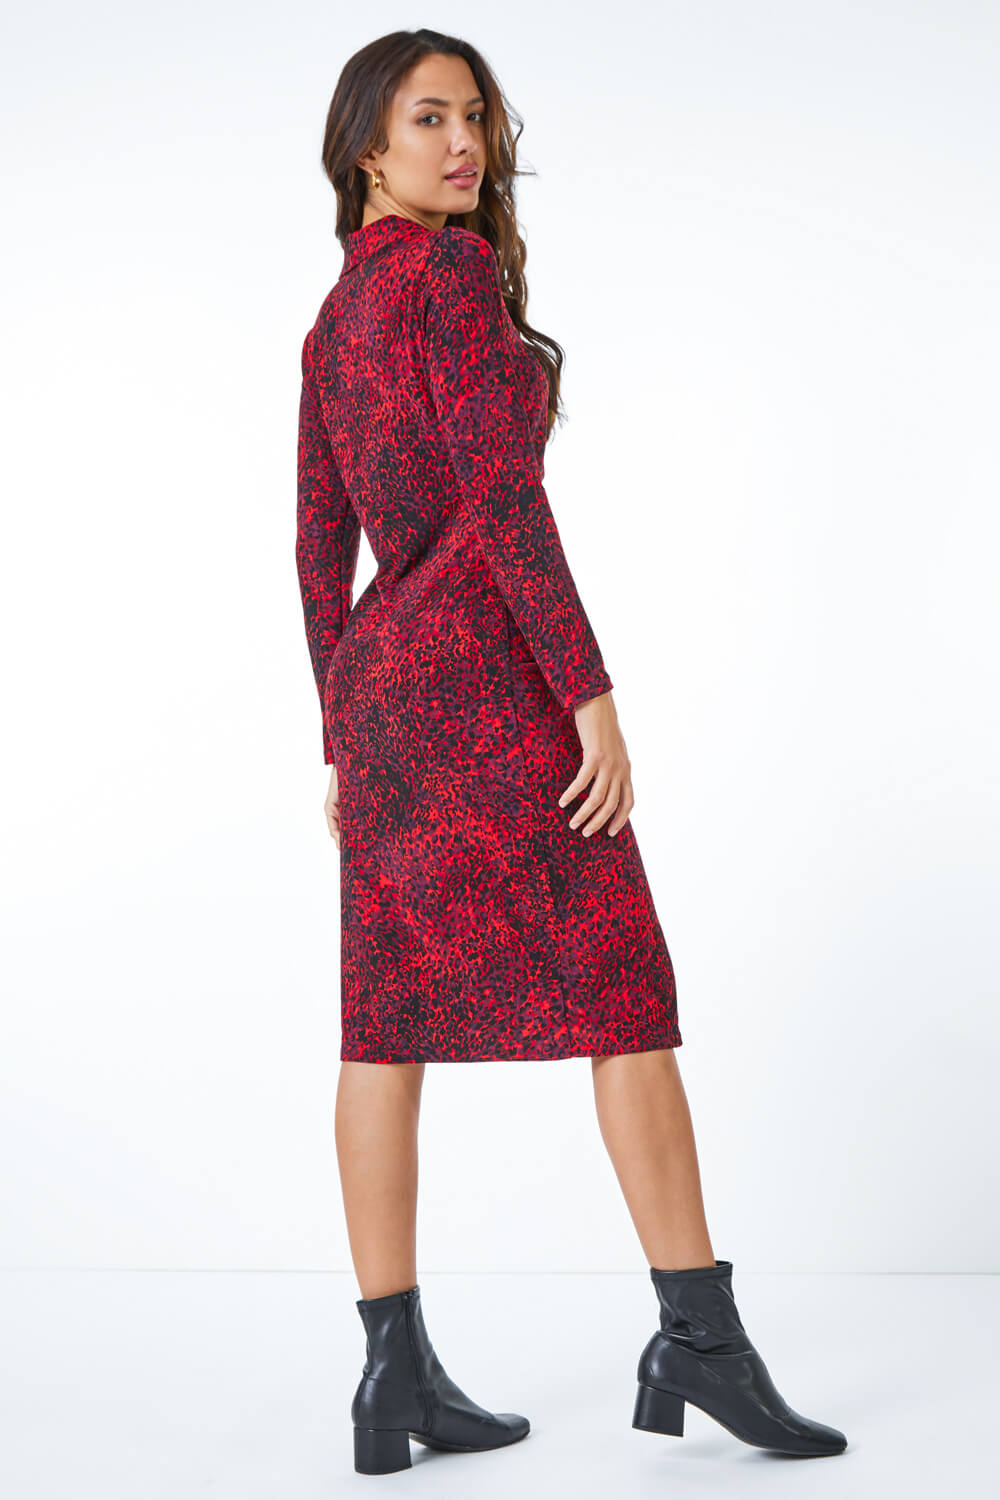 Red Ruched Front Stretch Leopard Print Dress, Image 3 of 5